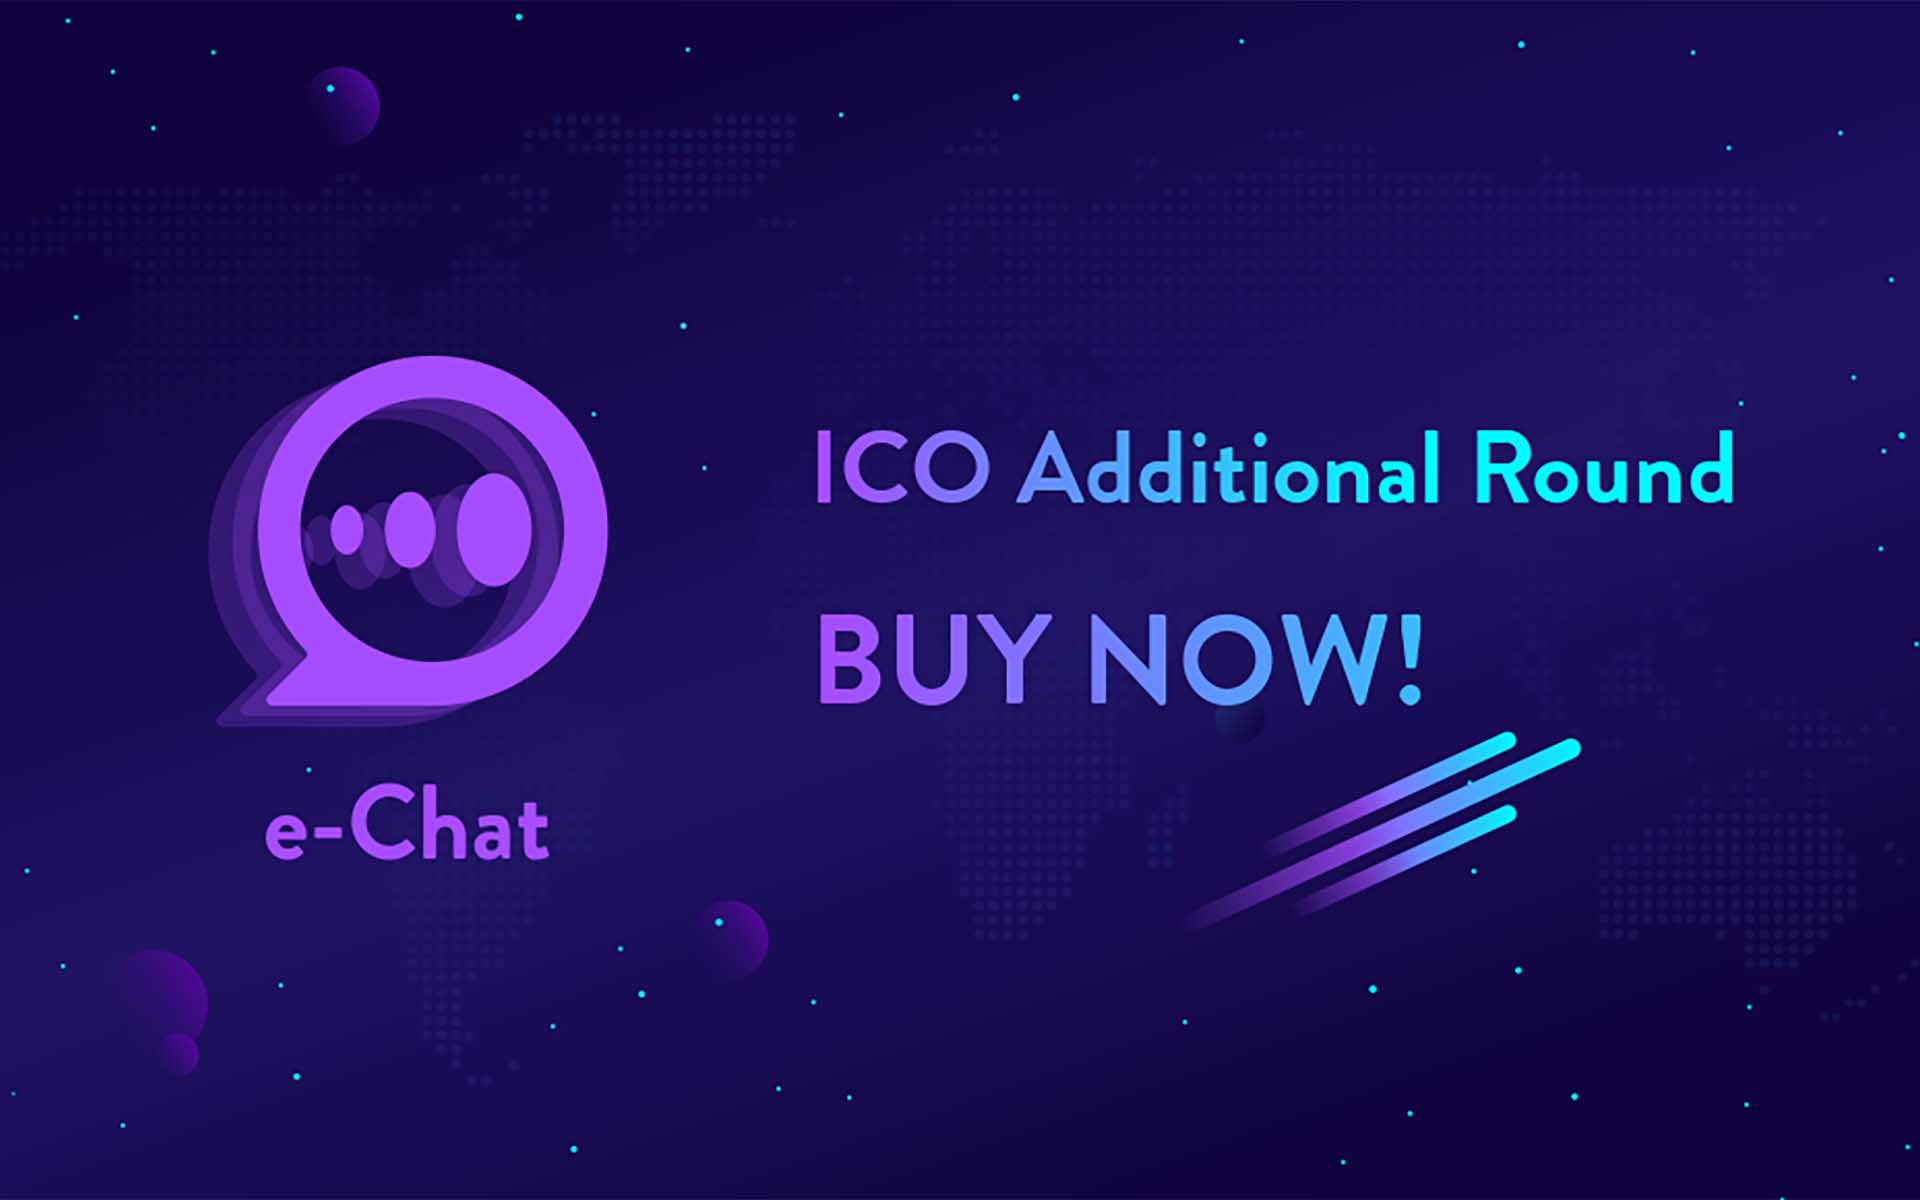 Get Ready to Be Surprised During the Additional Round of e-Chat ICO